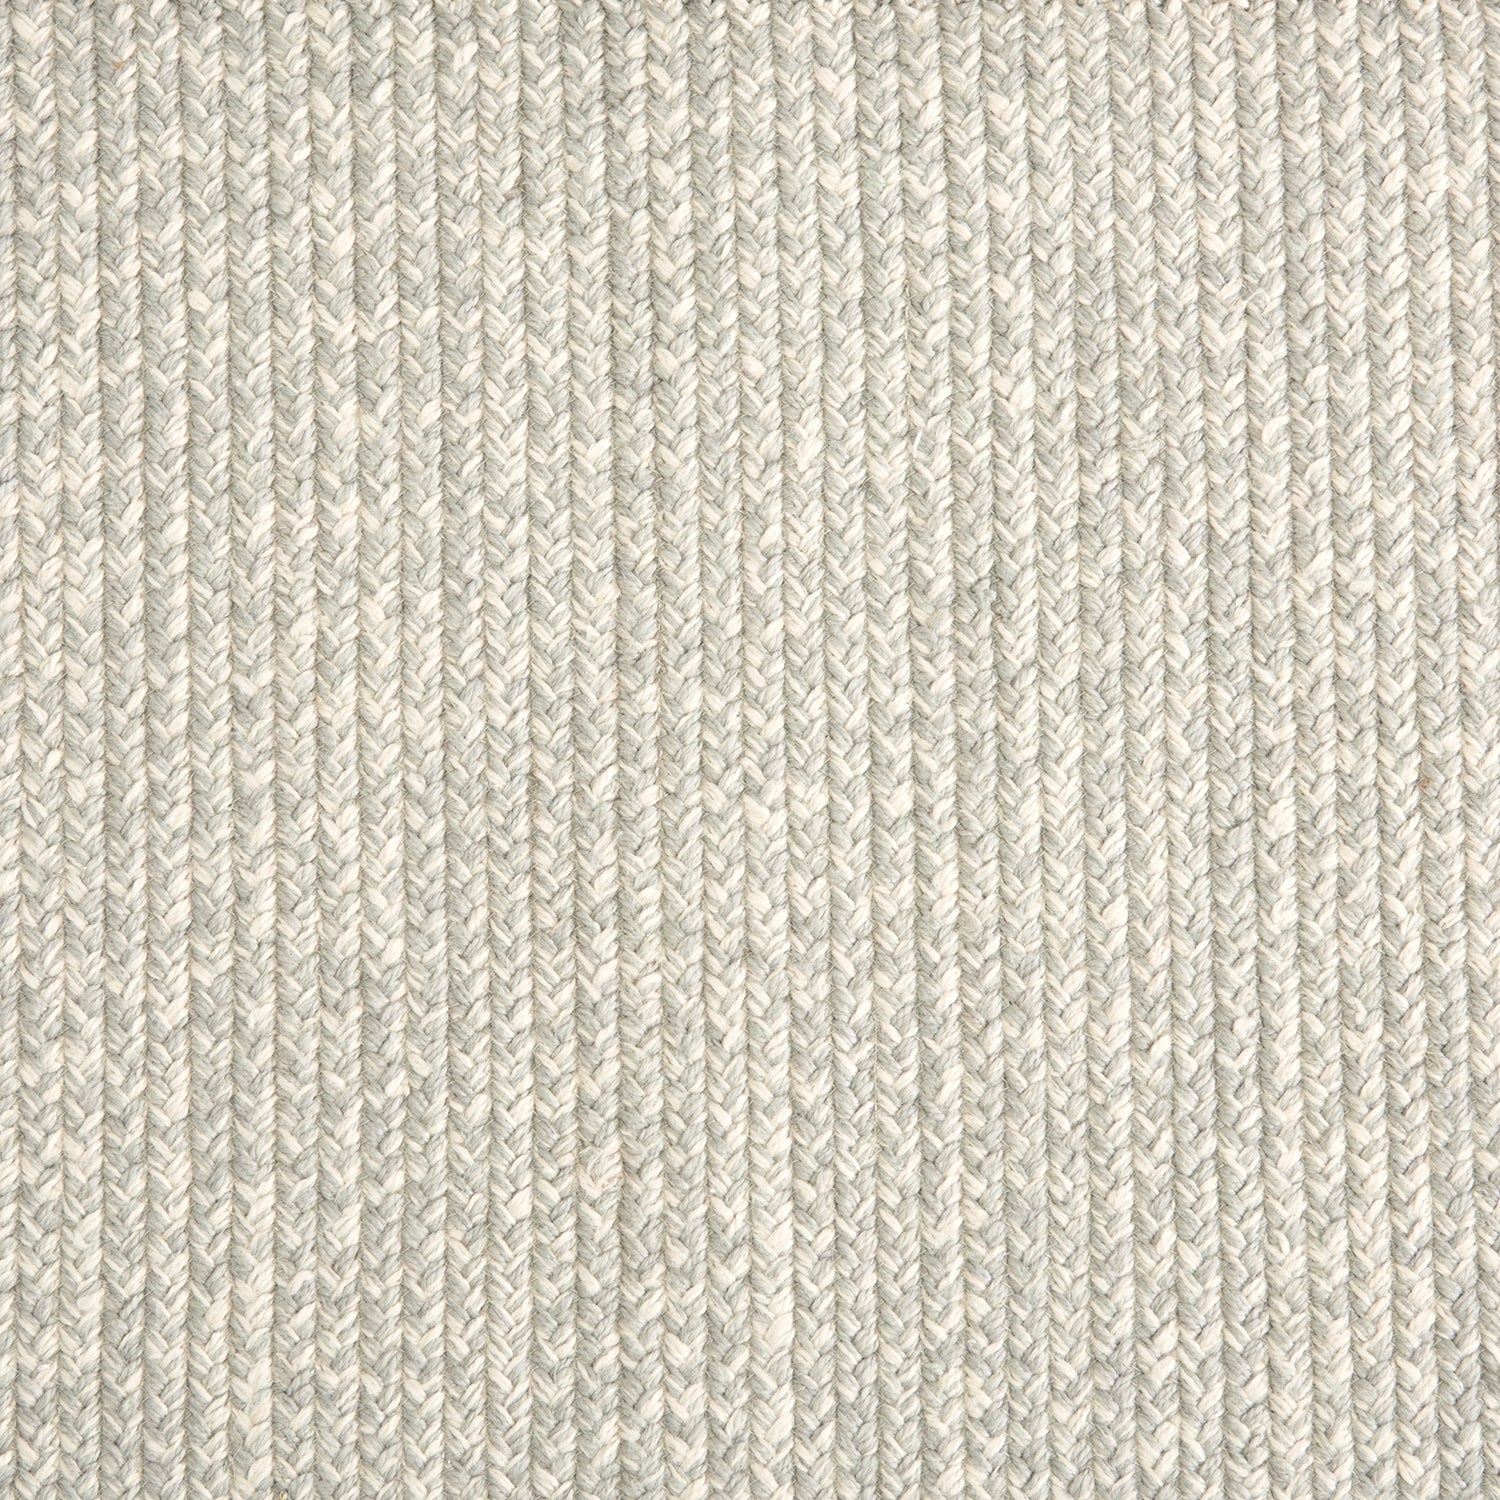 Outdoor broadloom carpet swatch in a chunky ribbed weave in mottled cream and gray.